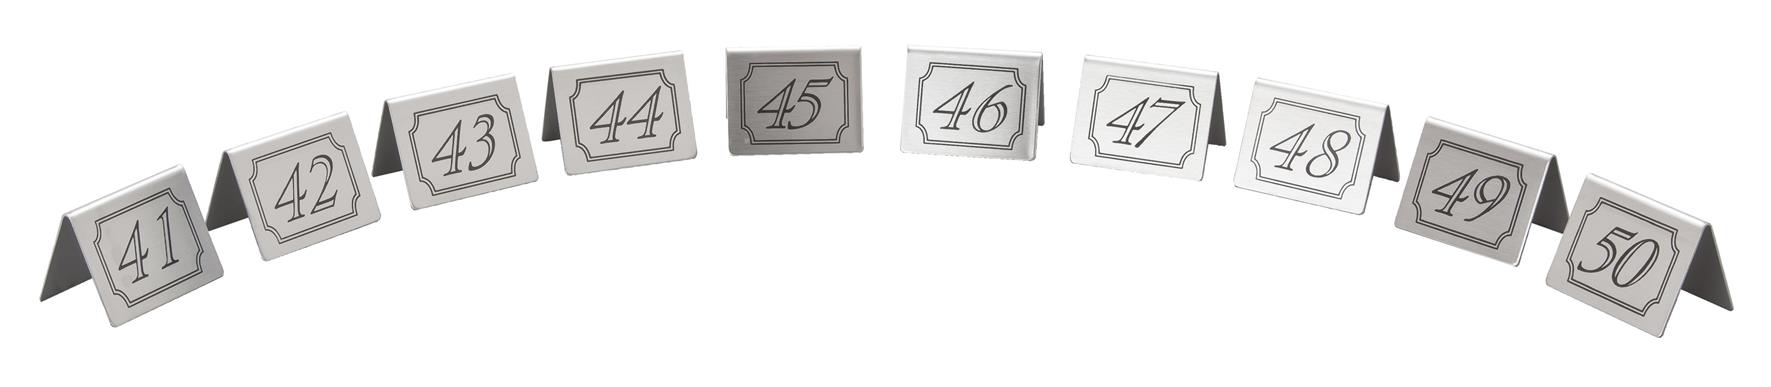 41-50 Table Numbers Stainless Steel (Each) 41-50, Table, Numbers, Stainless, Steel, Beaumont